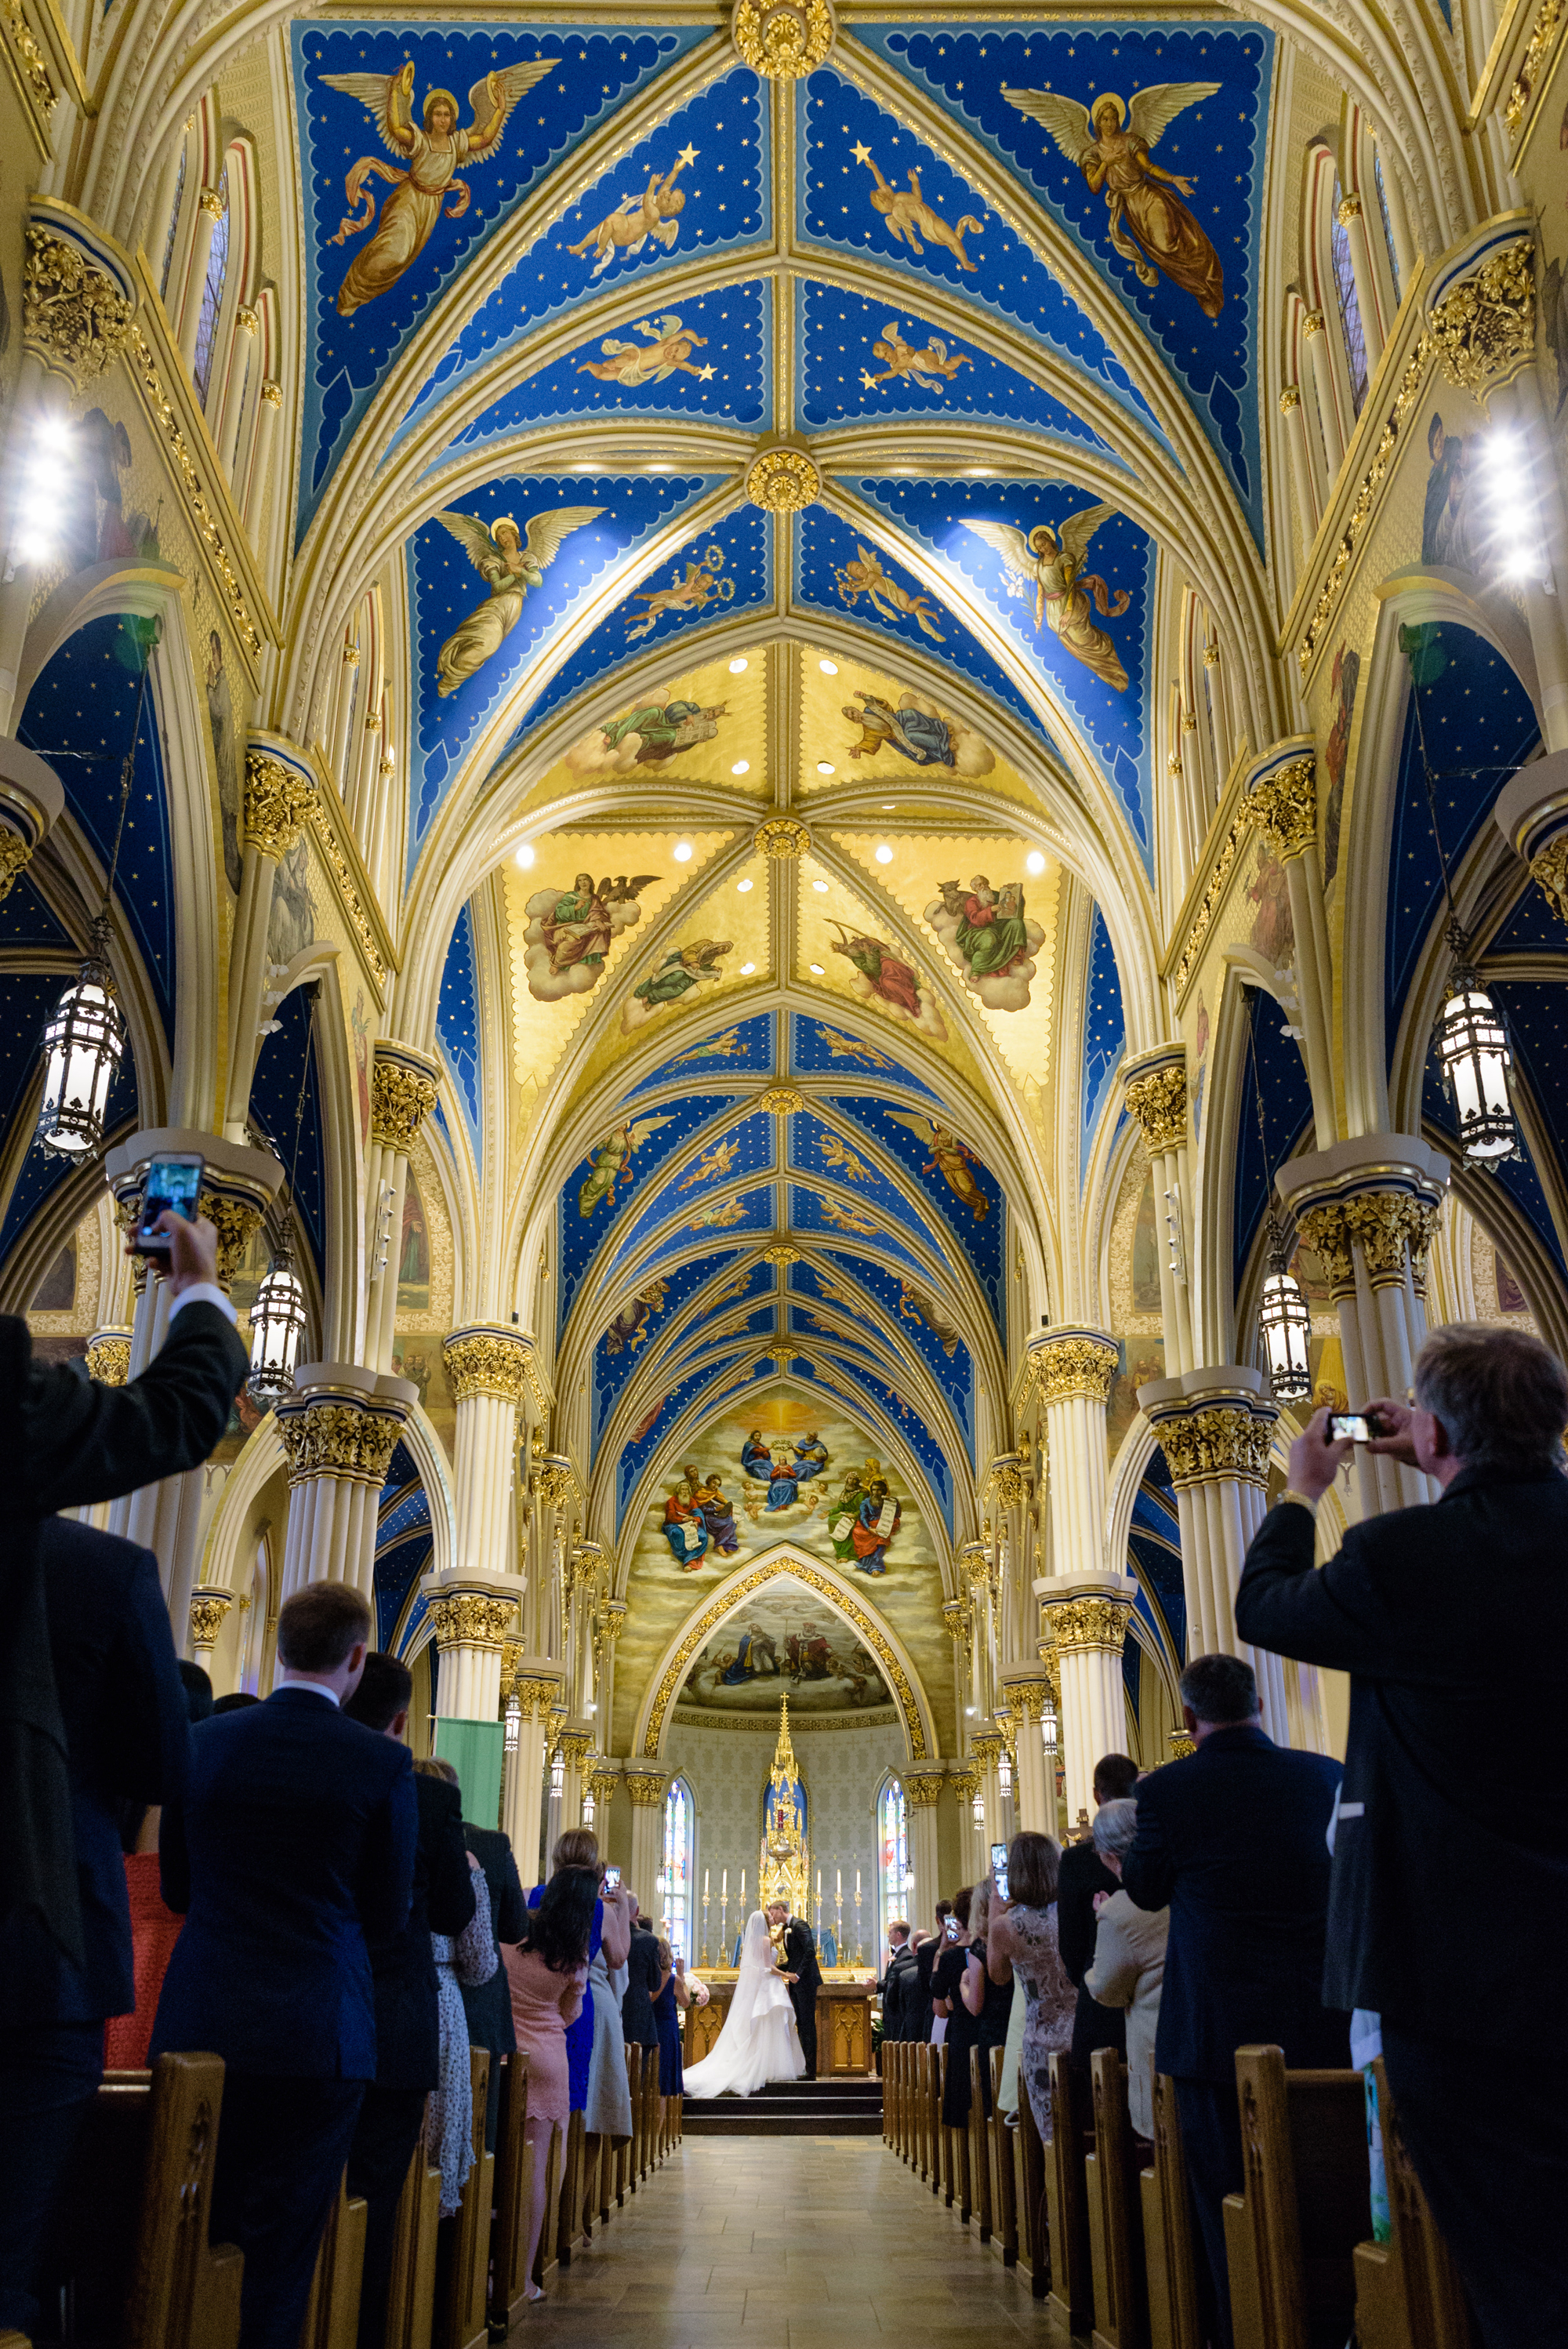 Wedding ceremony at the Basilica of the Sacred Heart on the campus of the University of Notre Dame